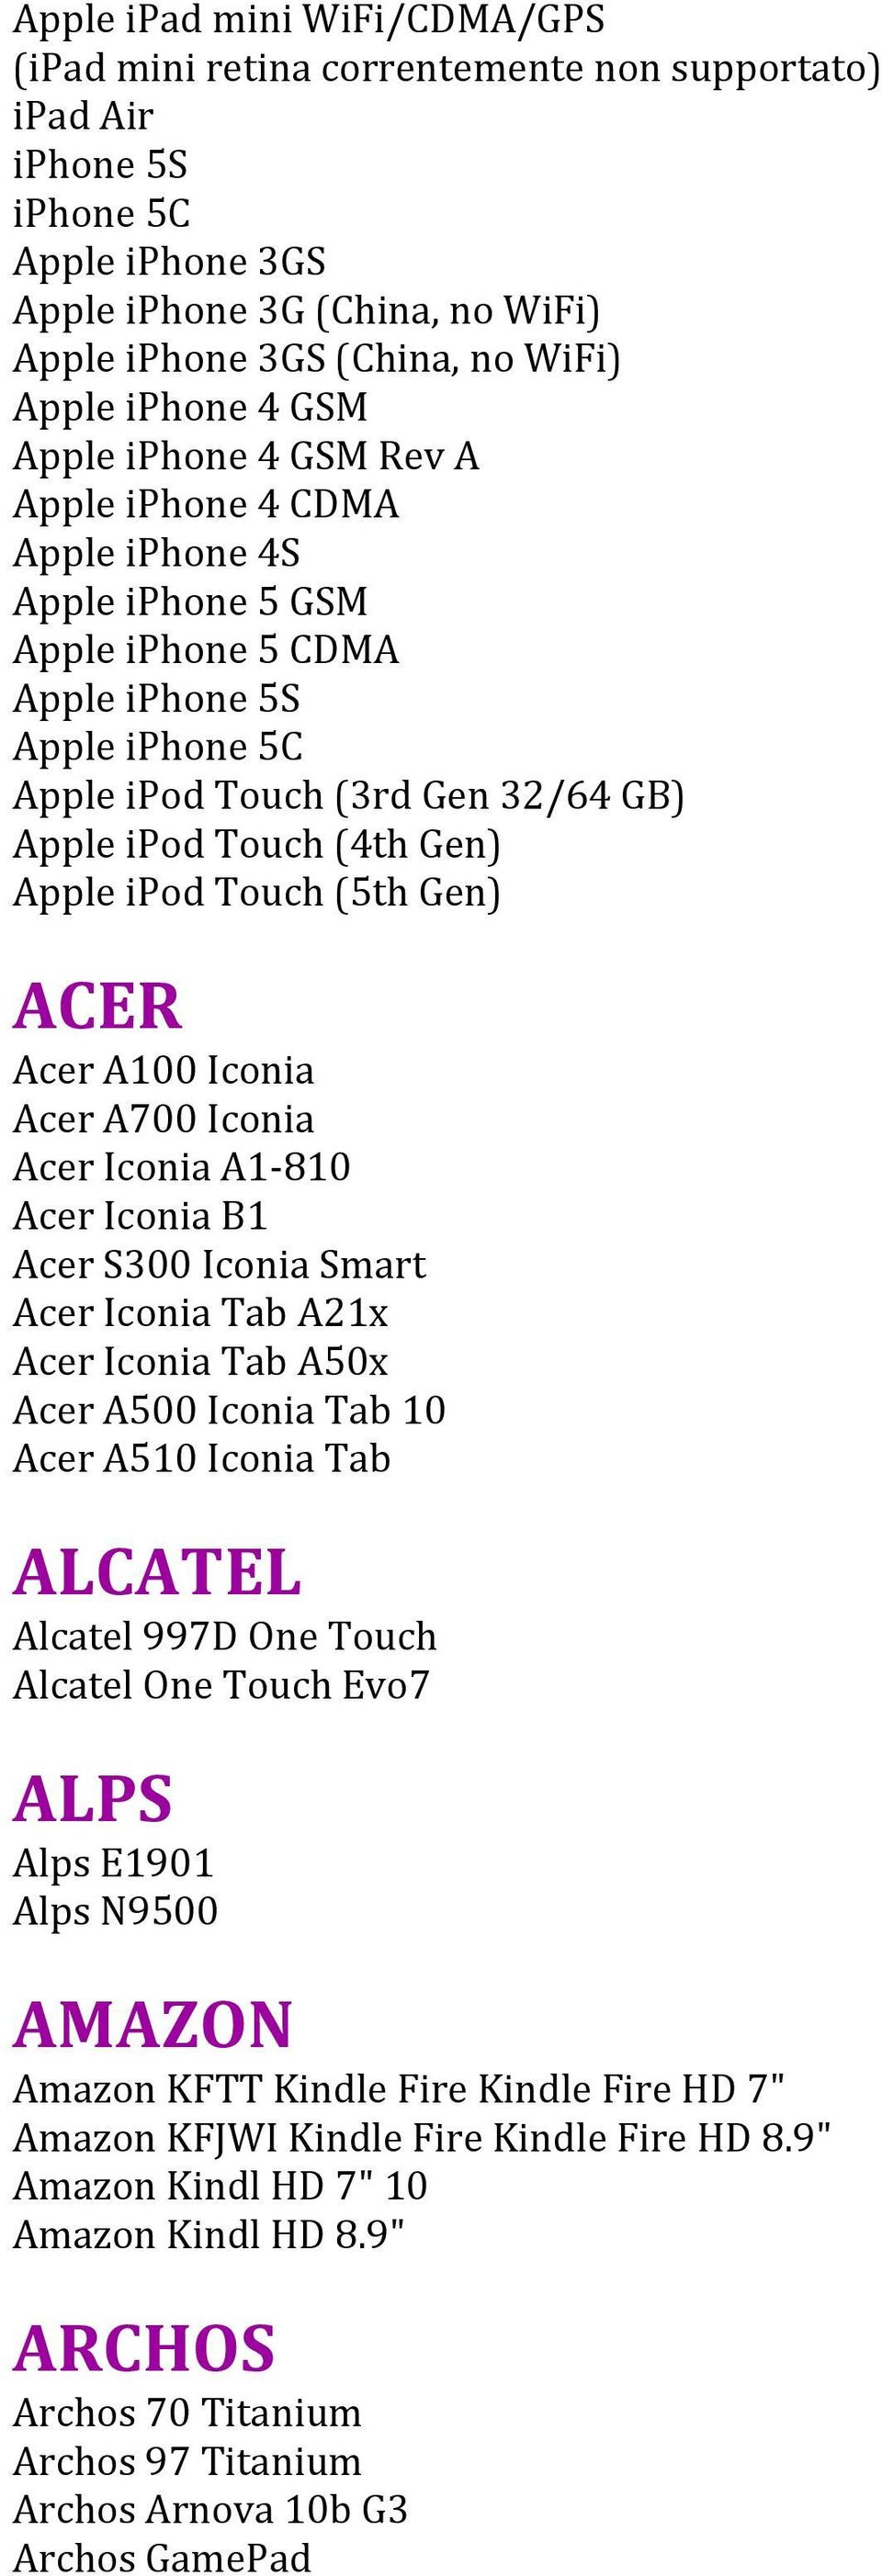 (4th Gen) Apple ipod Touch (5th Gen) ACER Acer A100 Iconia Acer A700 Iconia Acer Iconia A1-810 Acer Iconia B1 Acer S300 Iconia Smart Acer Iconia Tab A21x Acer Iconia Tab A50x Acer A500 Iconia Tab 10